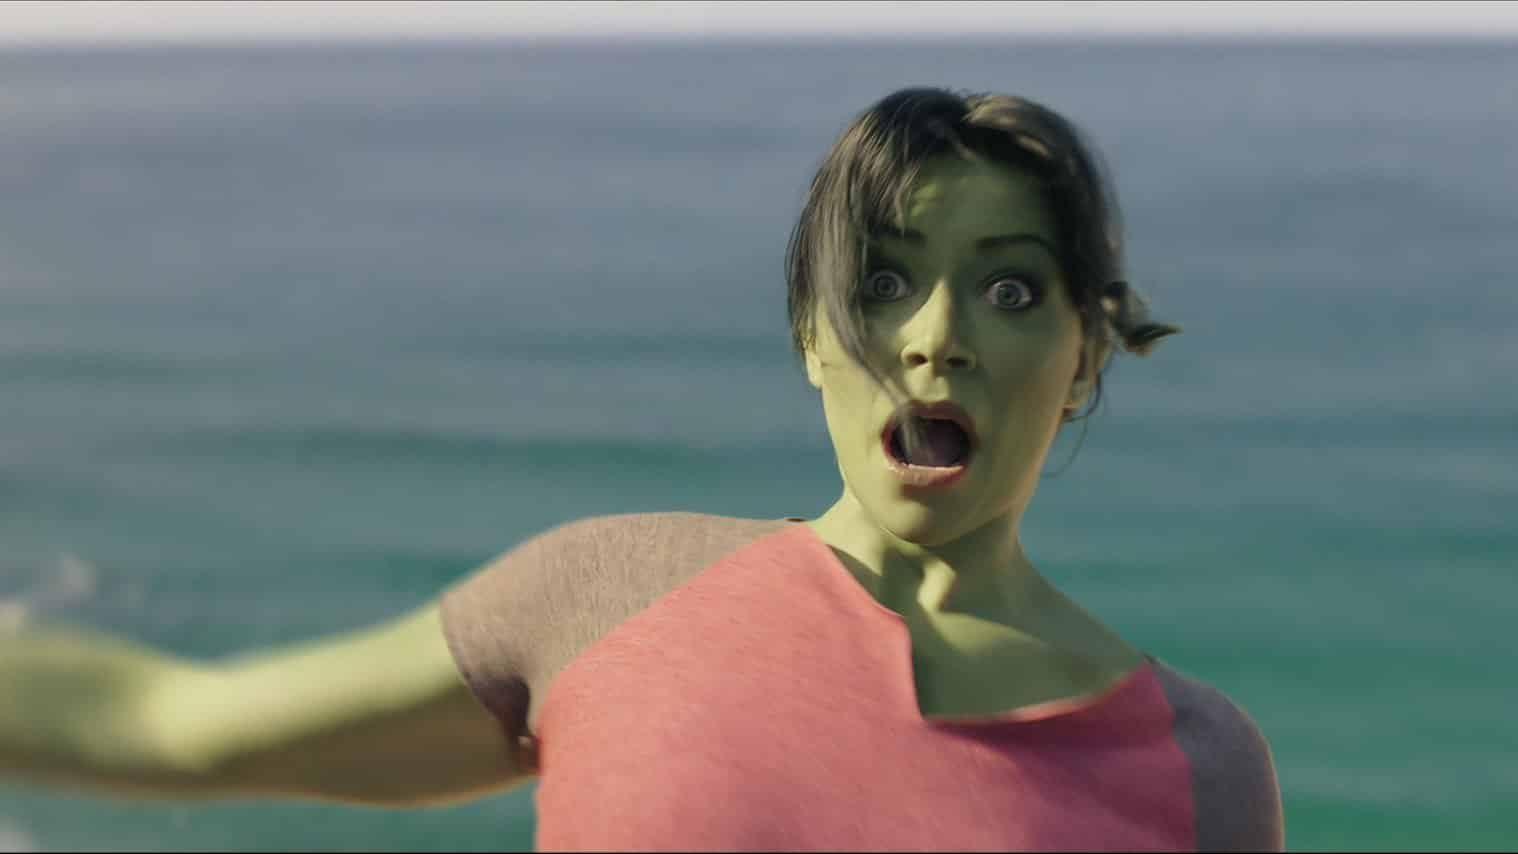 She-Hulk Director Hints at How Episode 1 Sets Up Future MCU Movies